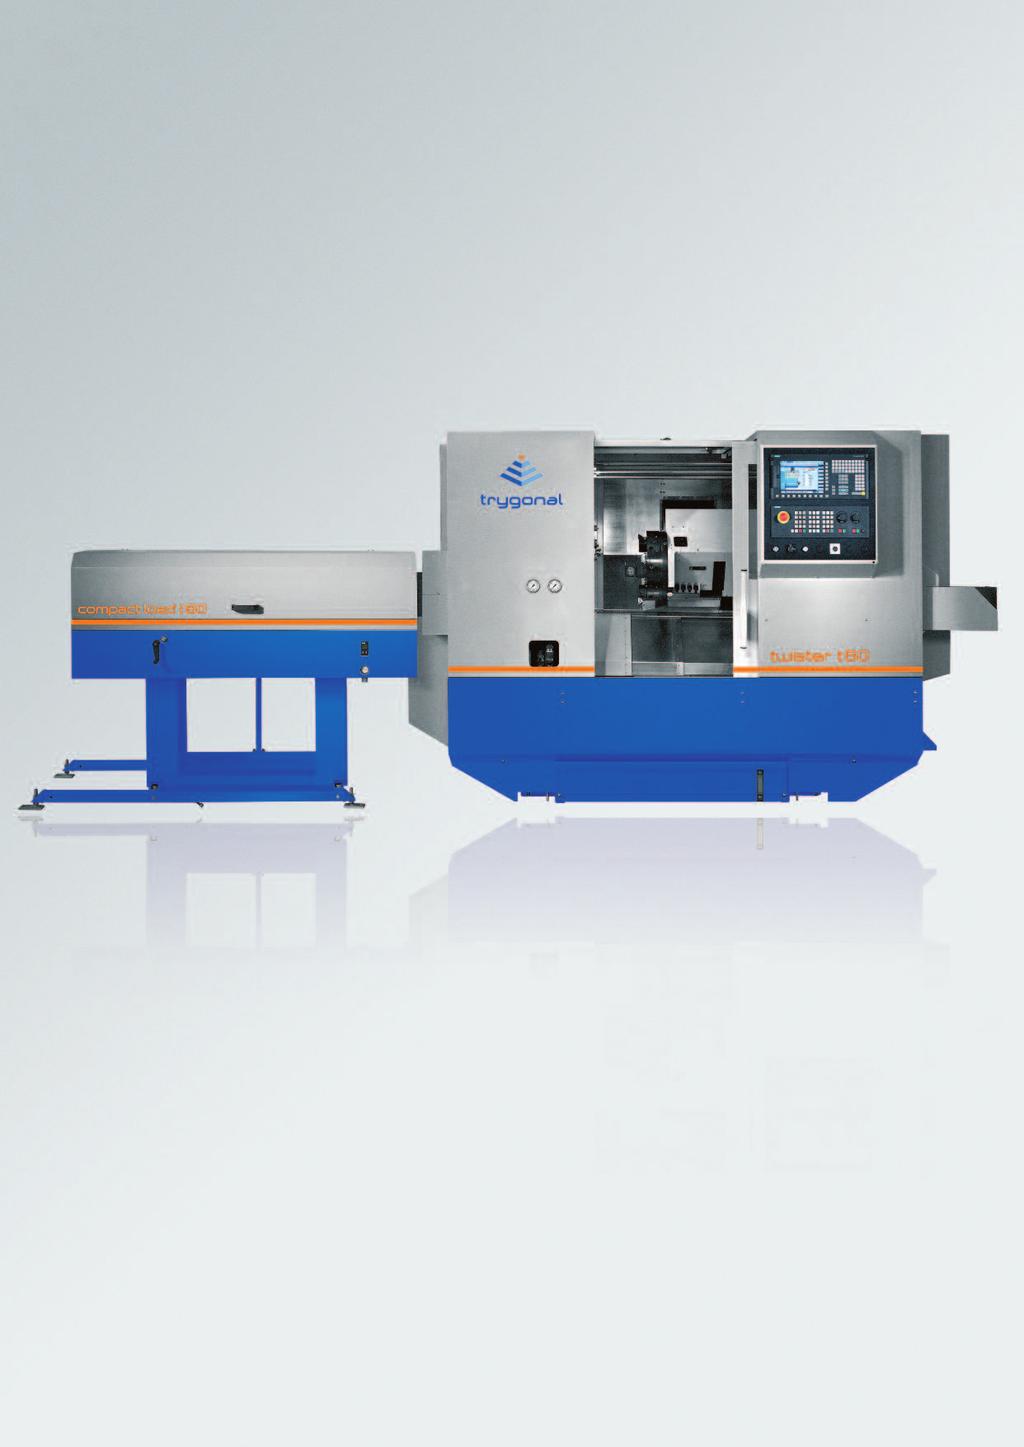 Machines, Software & Tools Our high-quality CNC twister machine systems allow the rapid processing of Trygonal materials to produce our high quality seals and turned plastic parts.